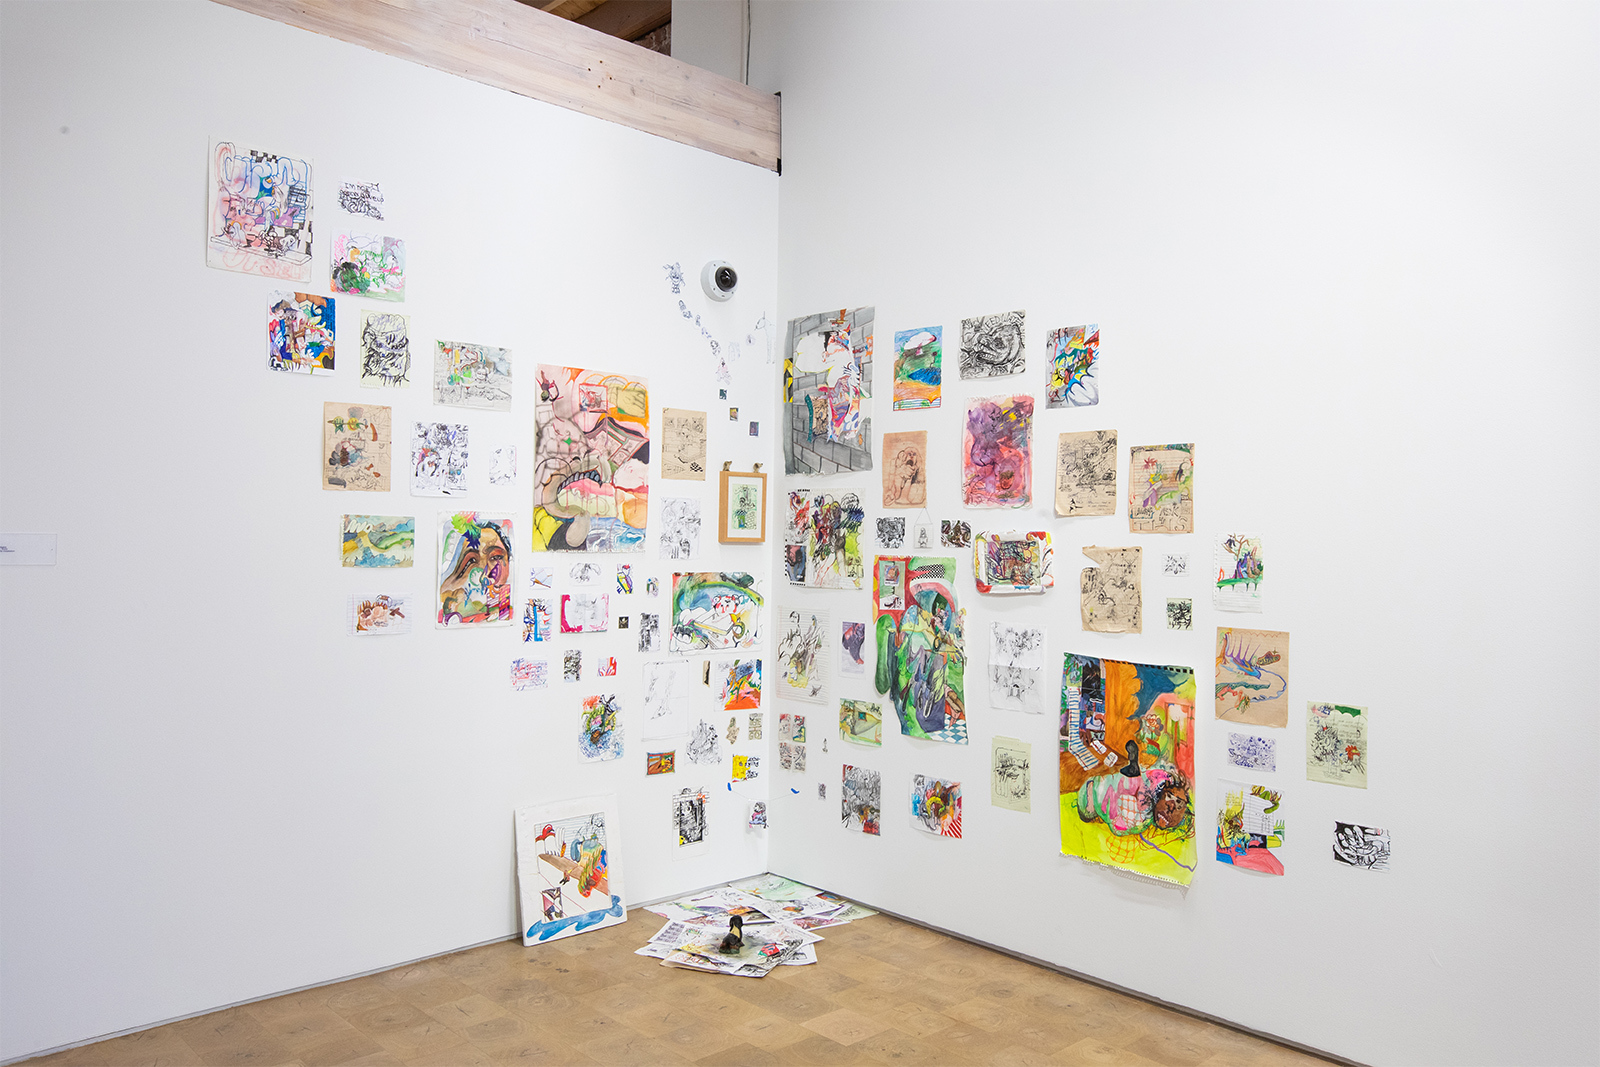 Thalia Rodgers - Several small works assembled in a corner of the gallery. Work is on paper and notebook pages. Paint, colored pencil, watercolor, and pen are the mediums. All are abstract, playful, colorful.